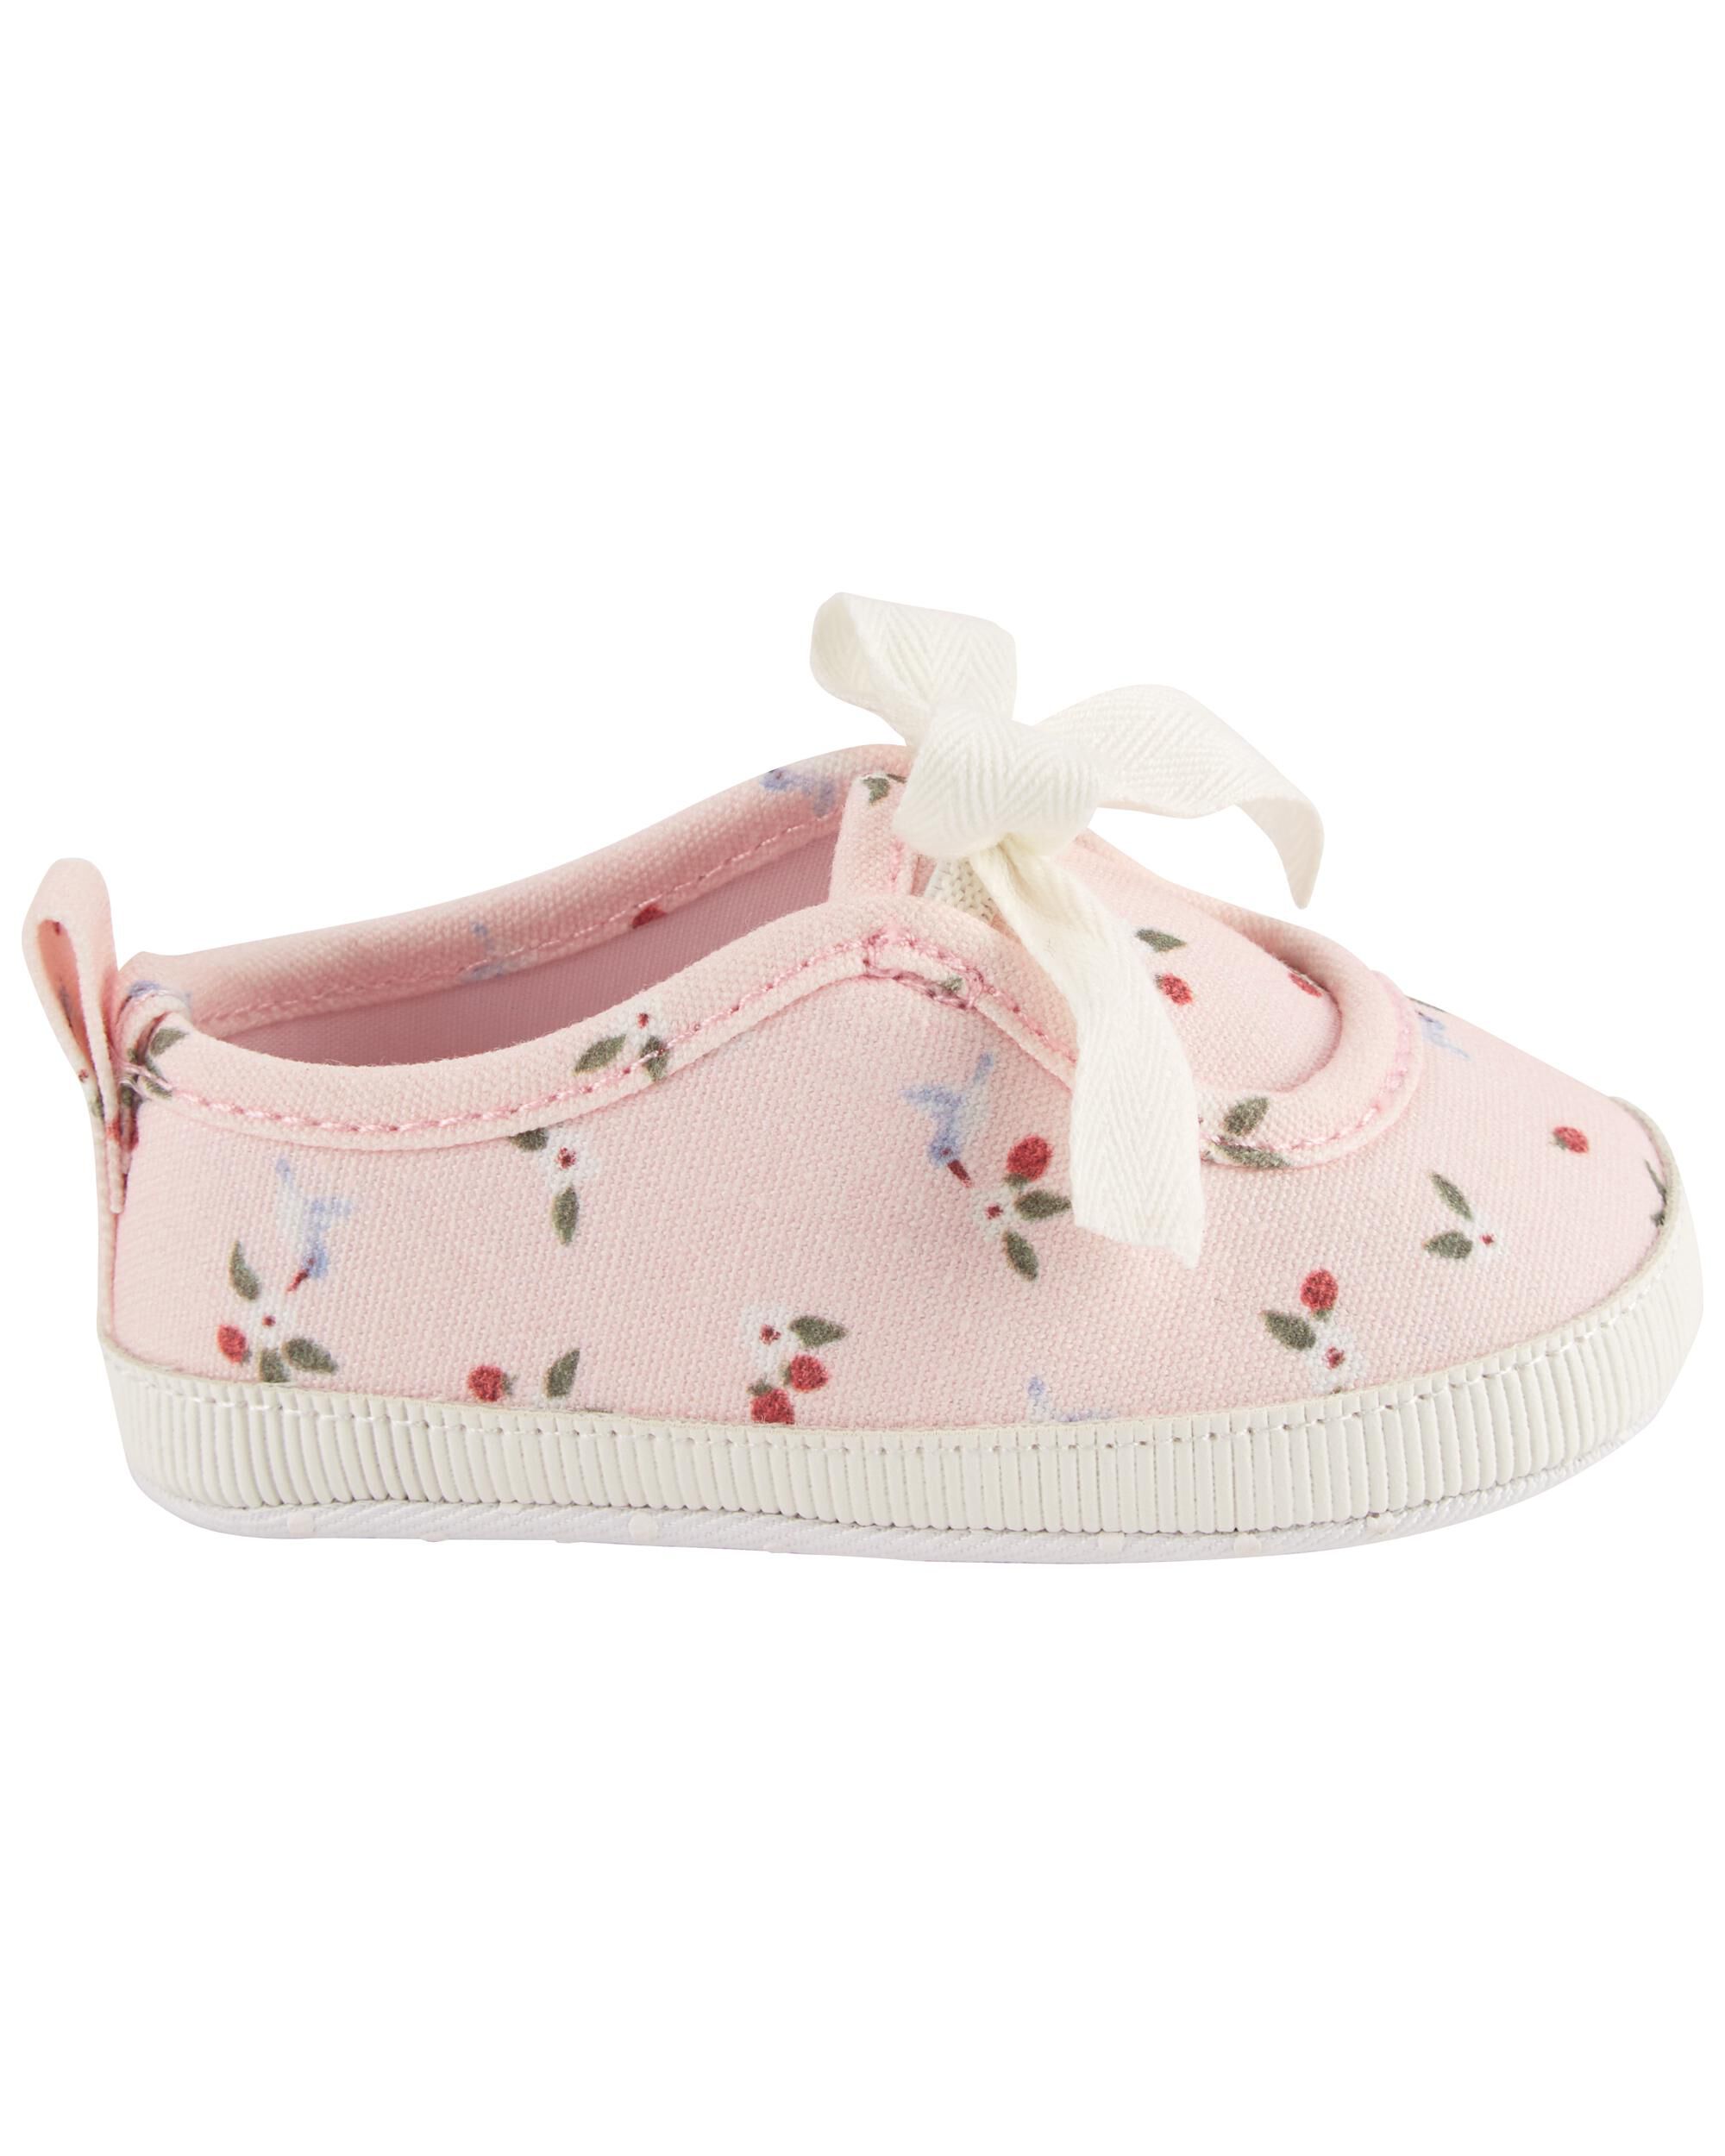 Carter's Baby Toddler Girls Kids Shoes Floral Athletic Canvas NWT Size 5 6 7 